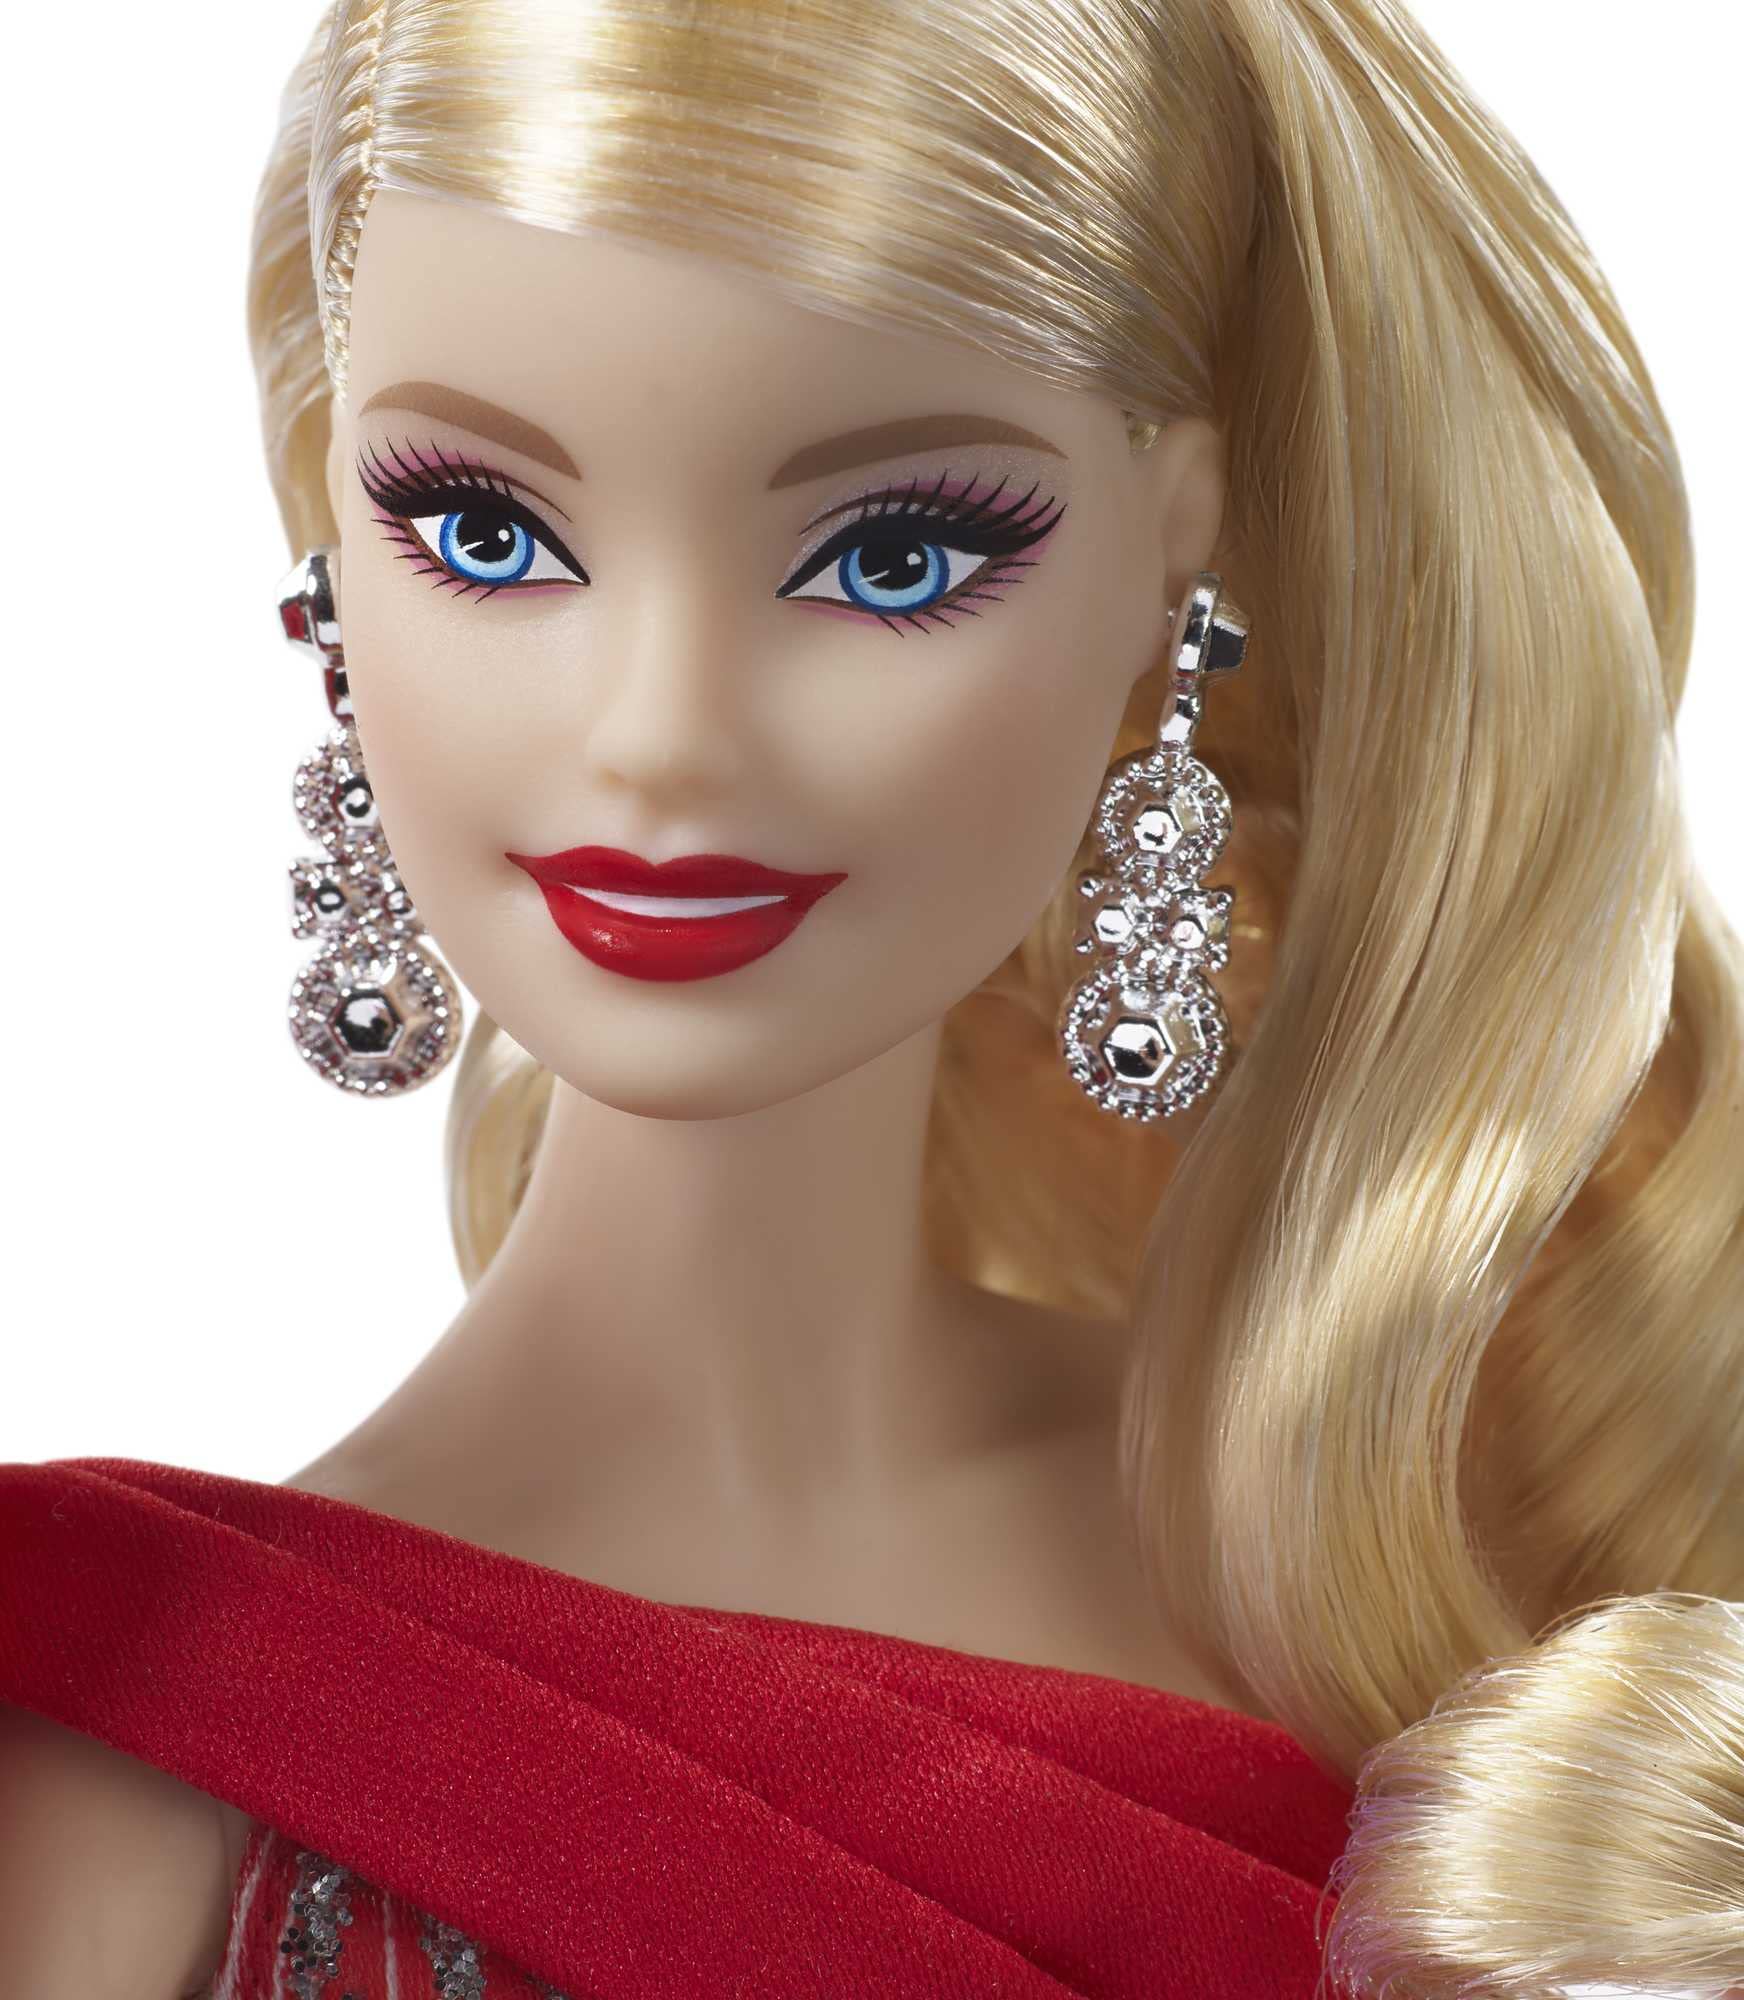 Barbie 2019 Holiday doll, 11.5-inch, Blonde, Wearing Red and White Gown, with Doll Stand and Certificate of Authenticity